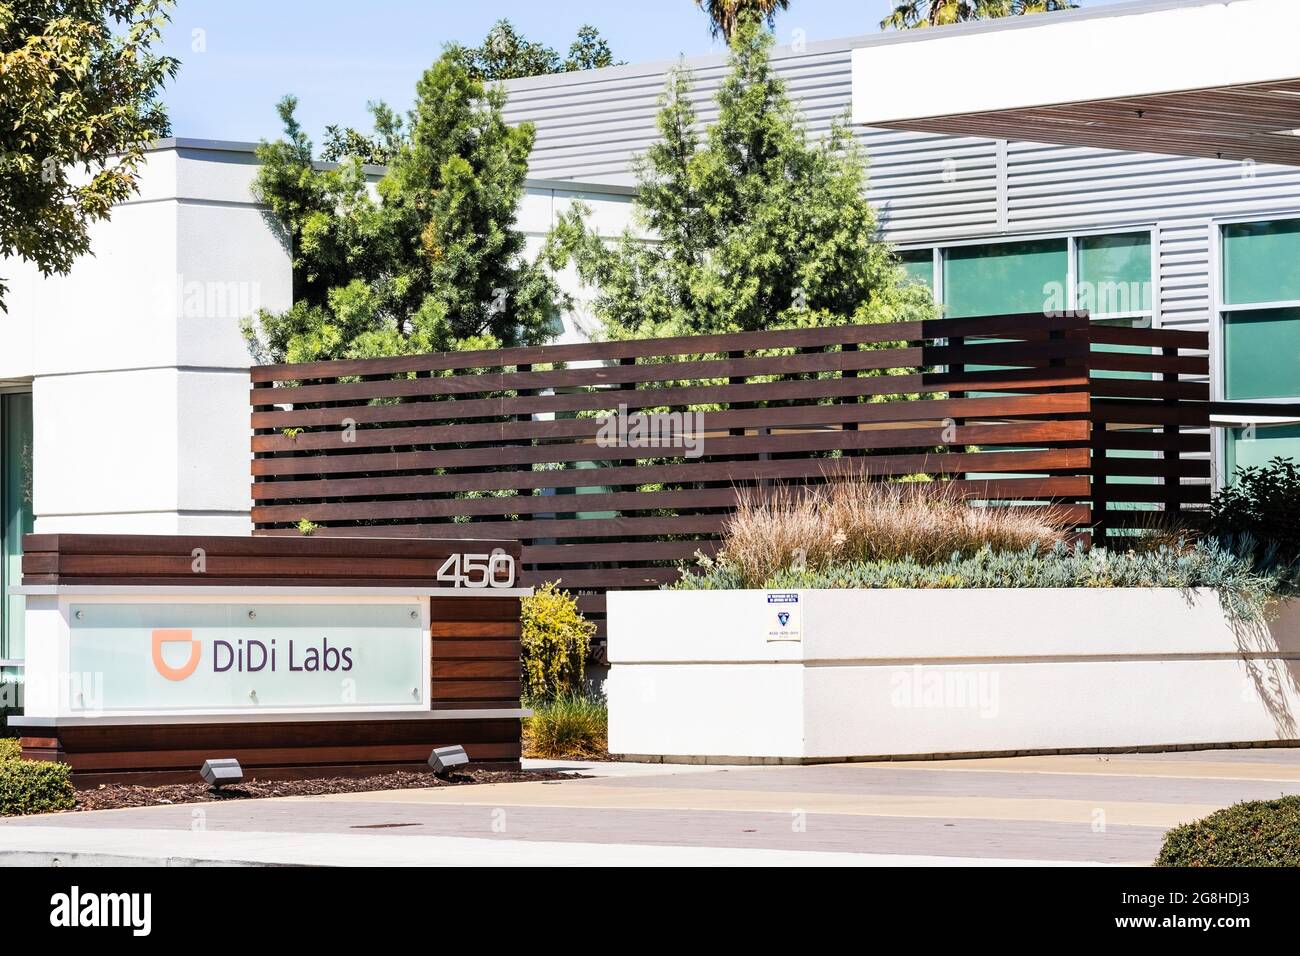 Sep 26, 2020 Mountain View / CA / USA - DiDi Labs offices in Silicon Valley; Didi Chuxing Technology Co. is a Chinese company providing app-based tran Stock Photo